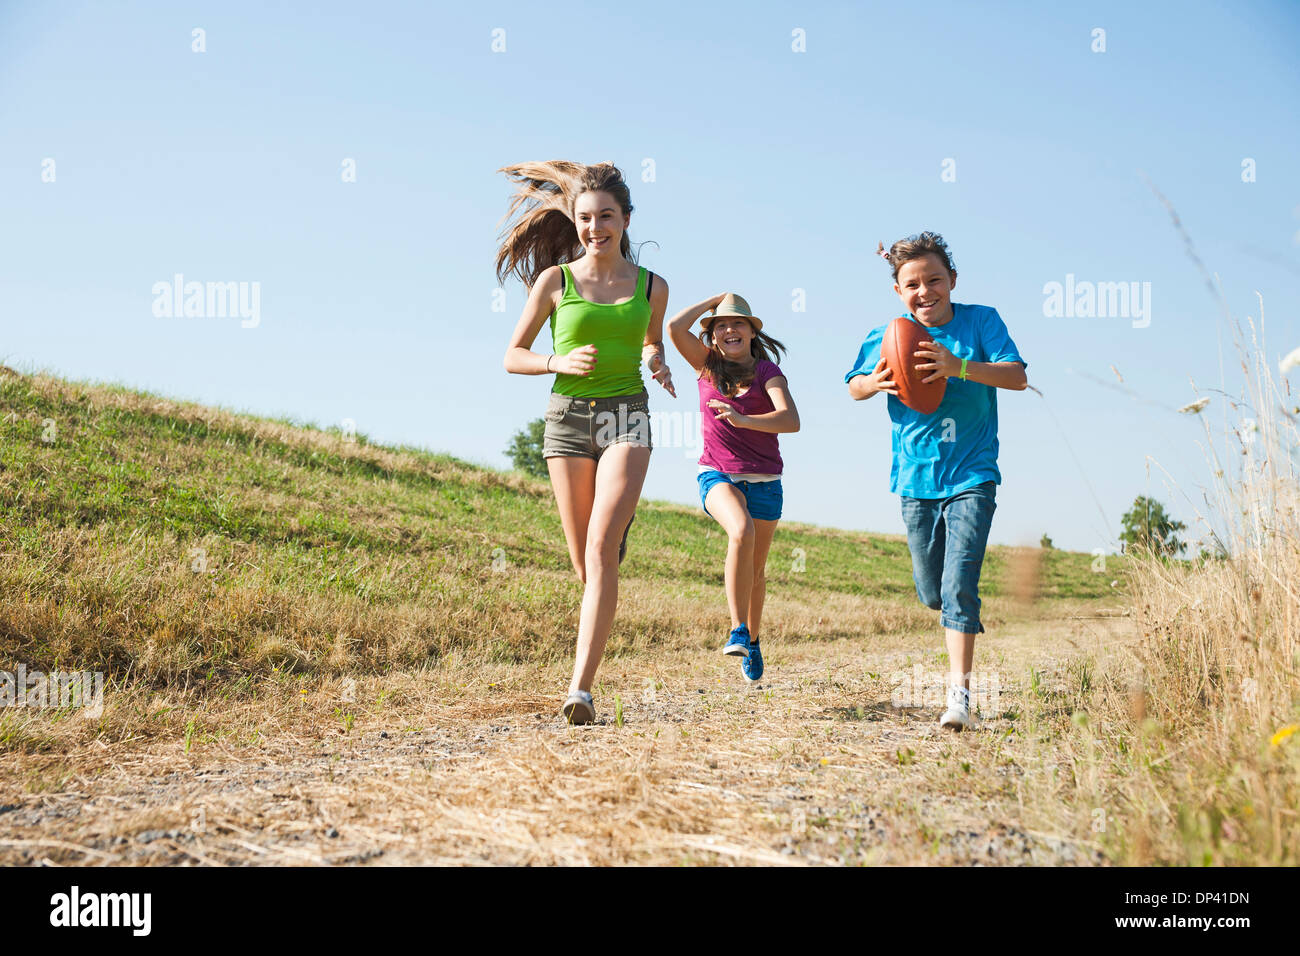 Girls running along pathway in field, Germany Stock Photo